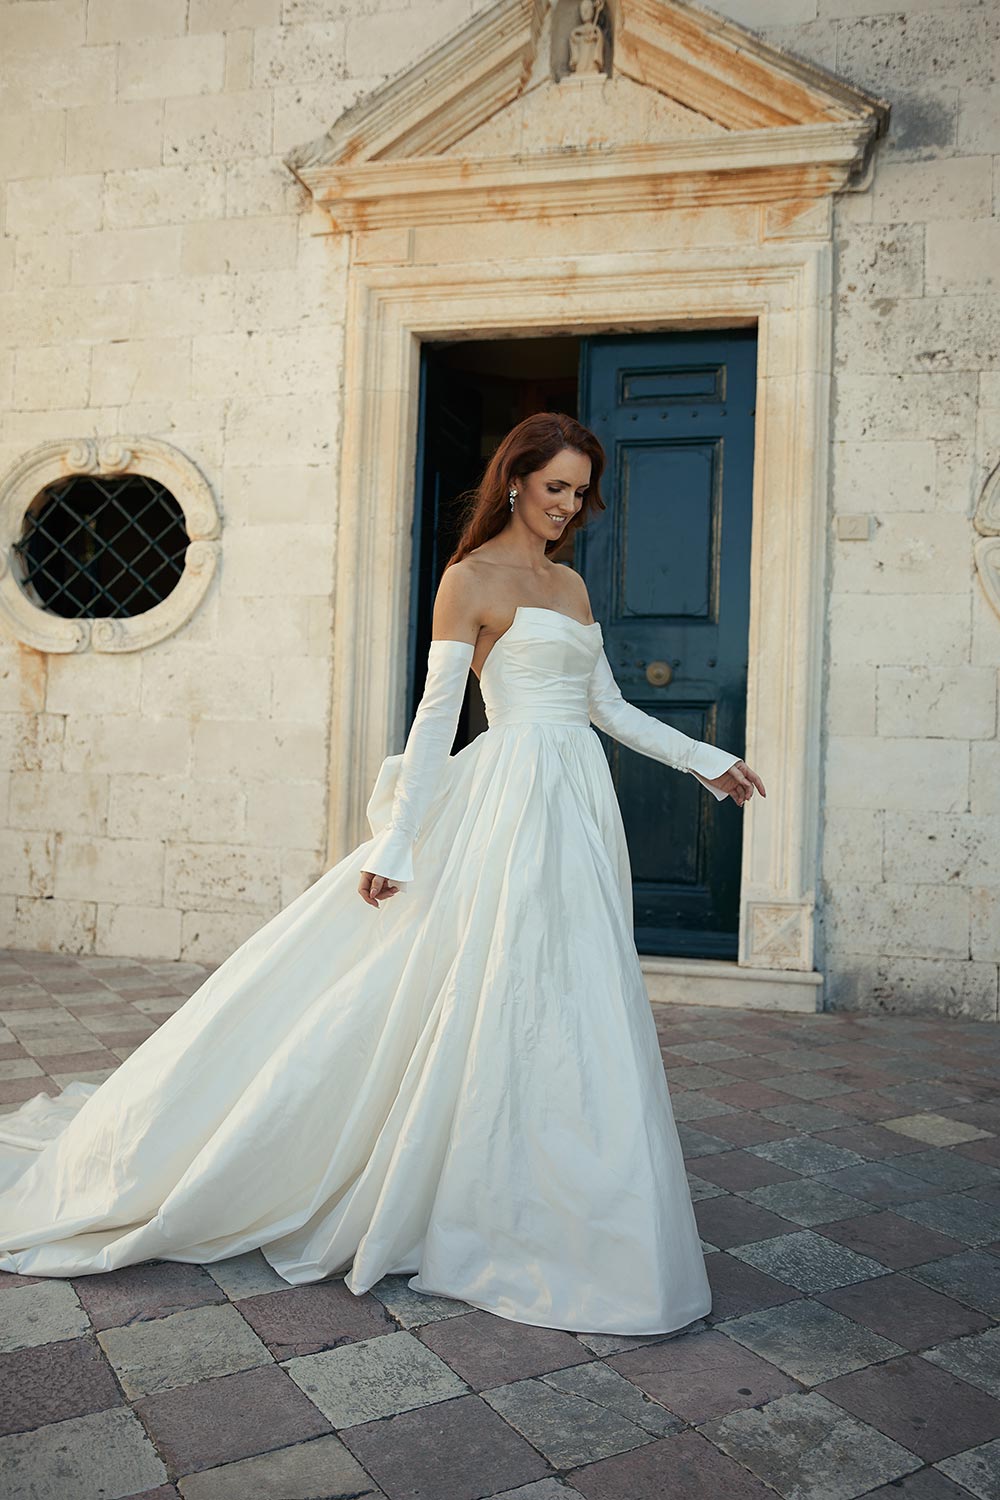 Discover Marija, a layered dupion silk wedding gown of regal romance. Features a scoop neckline, draped bodice, detachable sleeves and bow, and a long train. By Vinka Design